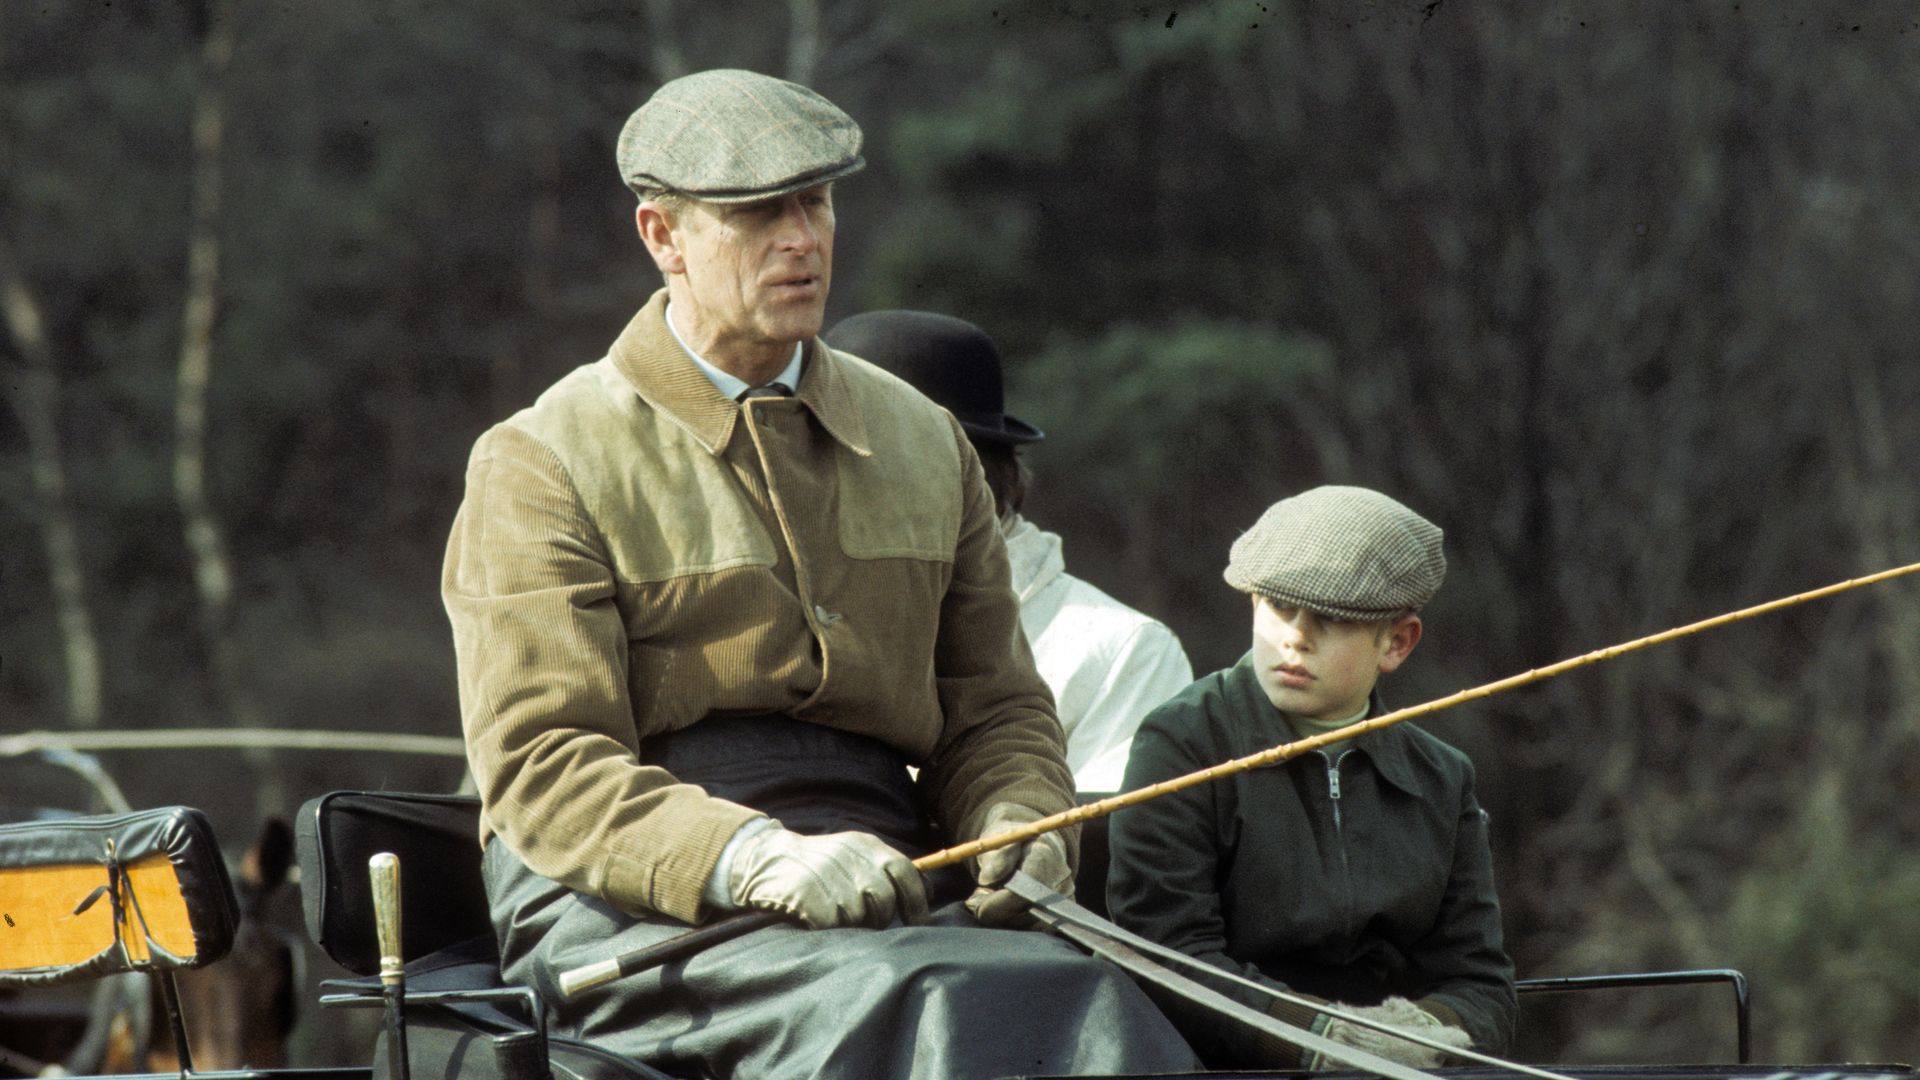 Prince Philip and Prince Edward carriage driving